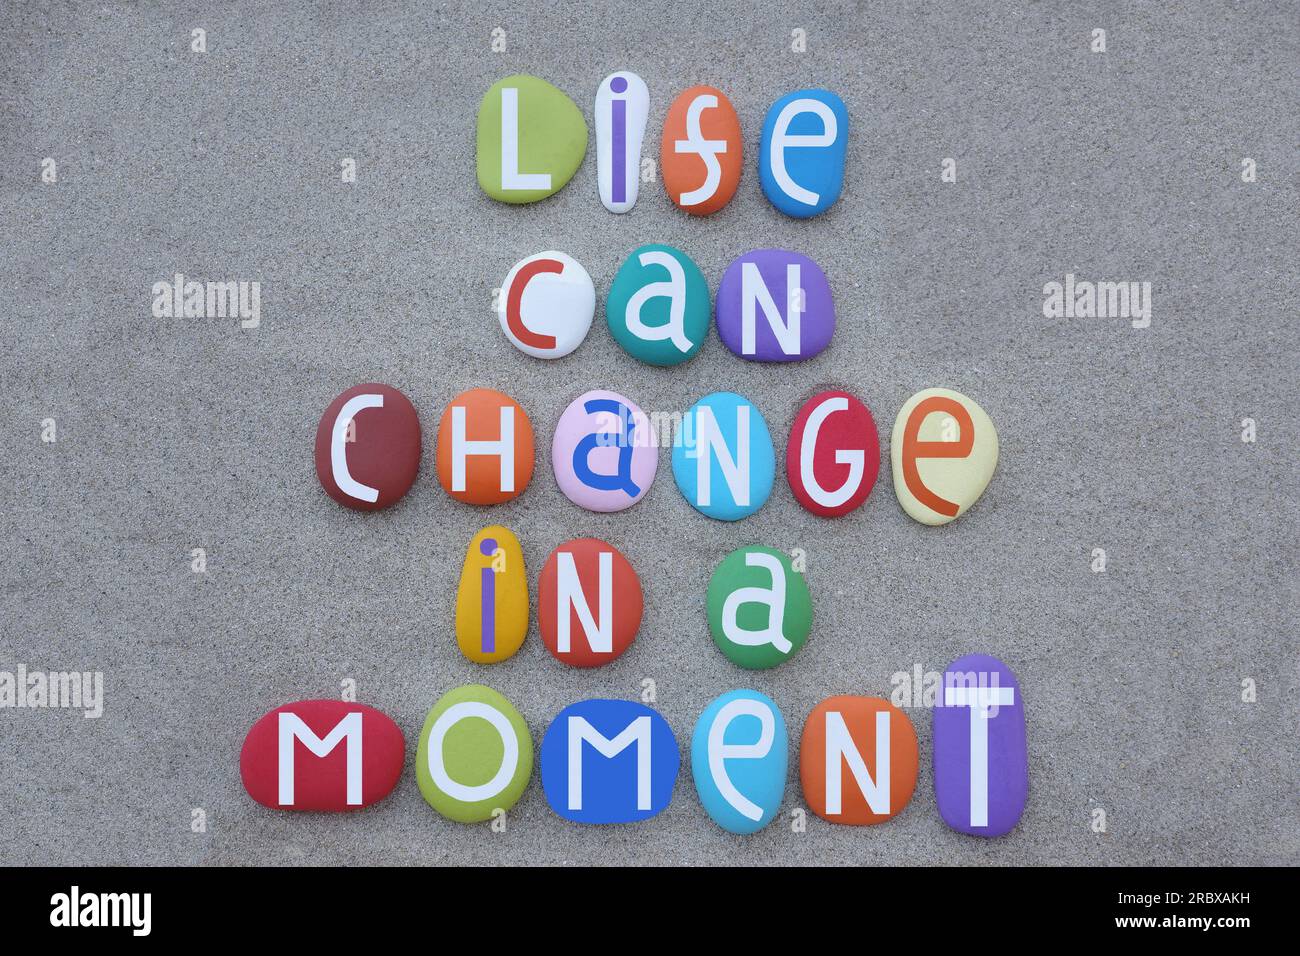 Life can change in a moment Stock Photo